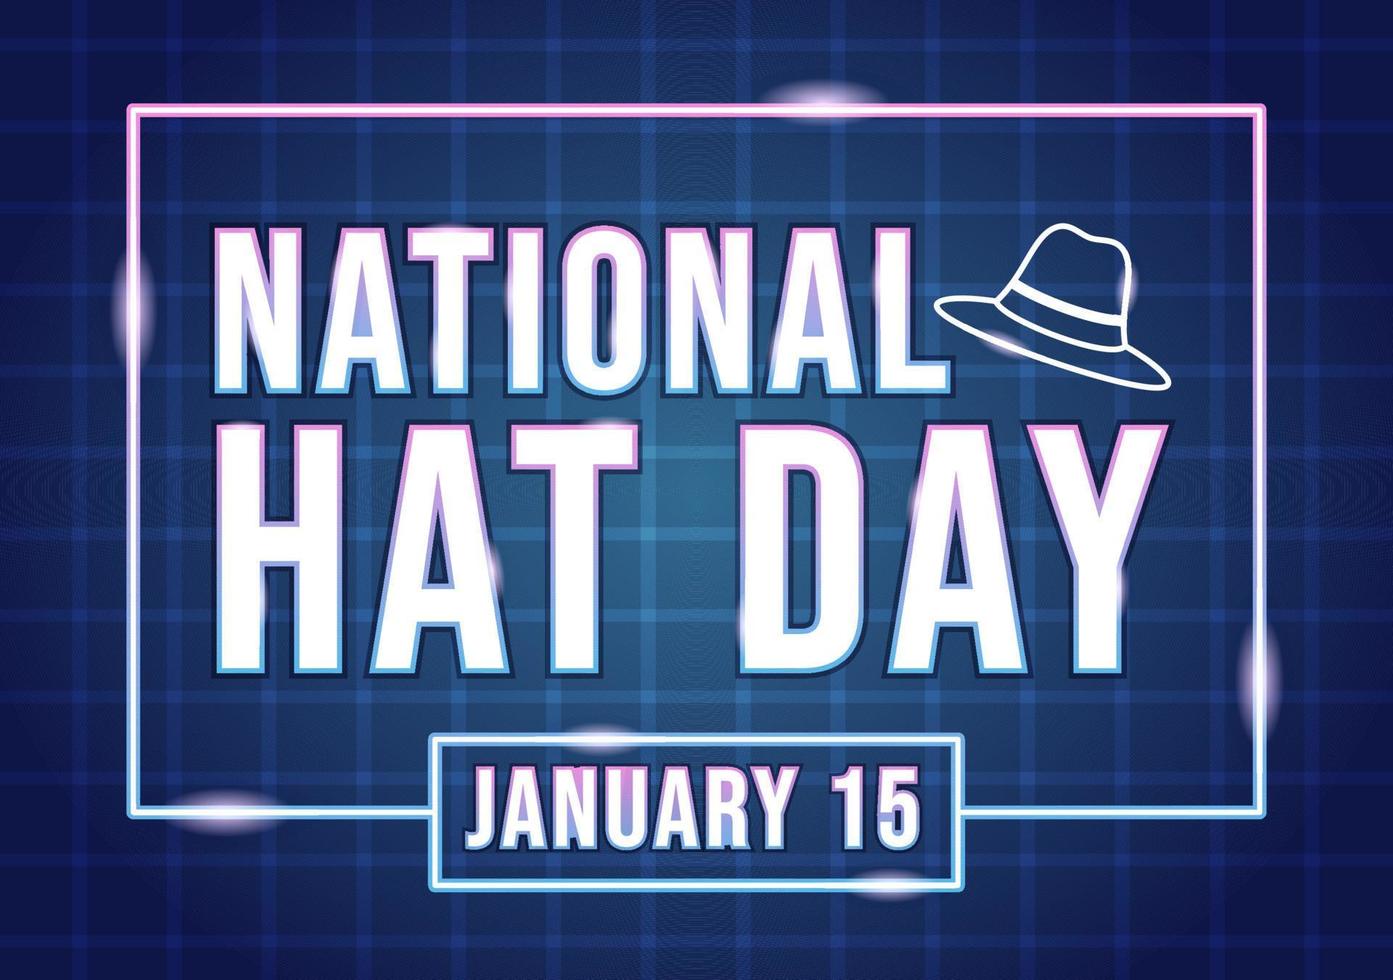 National Hat Day Celebrated Each Year on January 15th with Fedora Hats, Cap, Cloche or Derby in Flat Cartoon Hand Drawn Templates Illustration vector